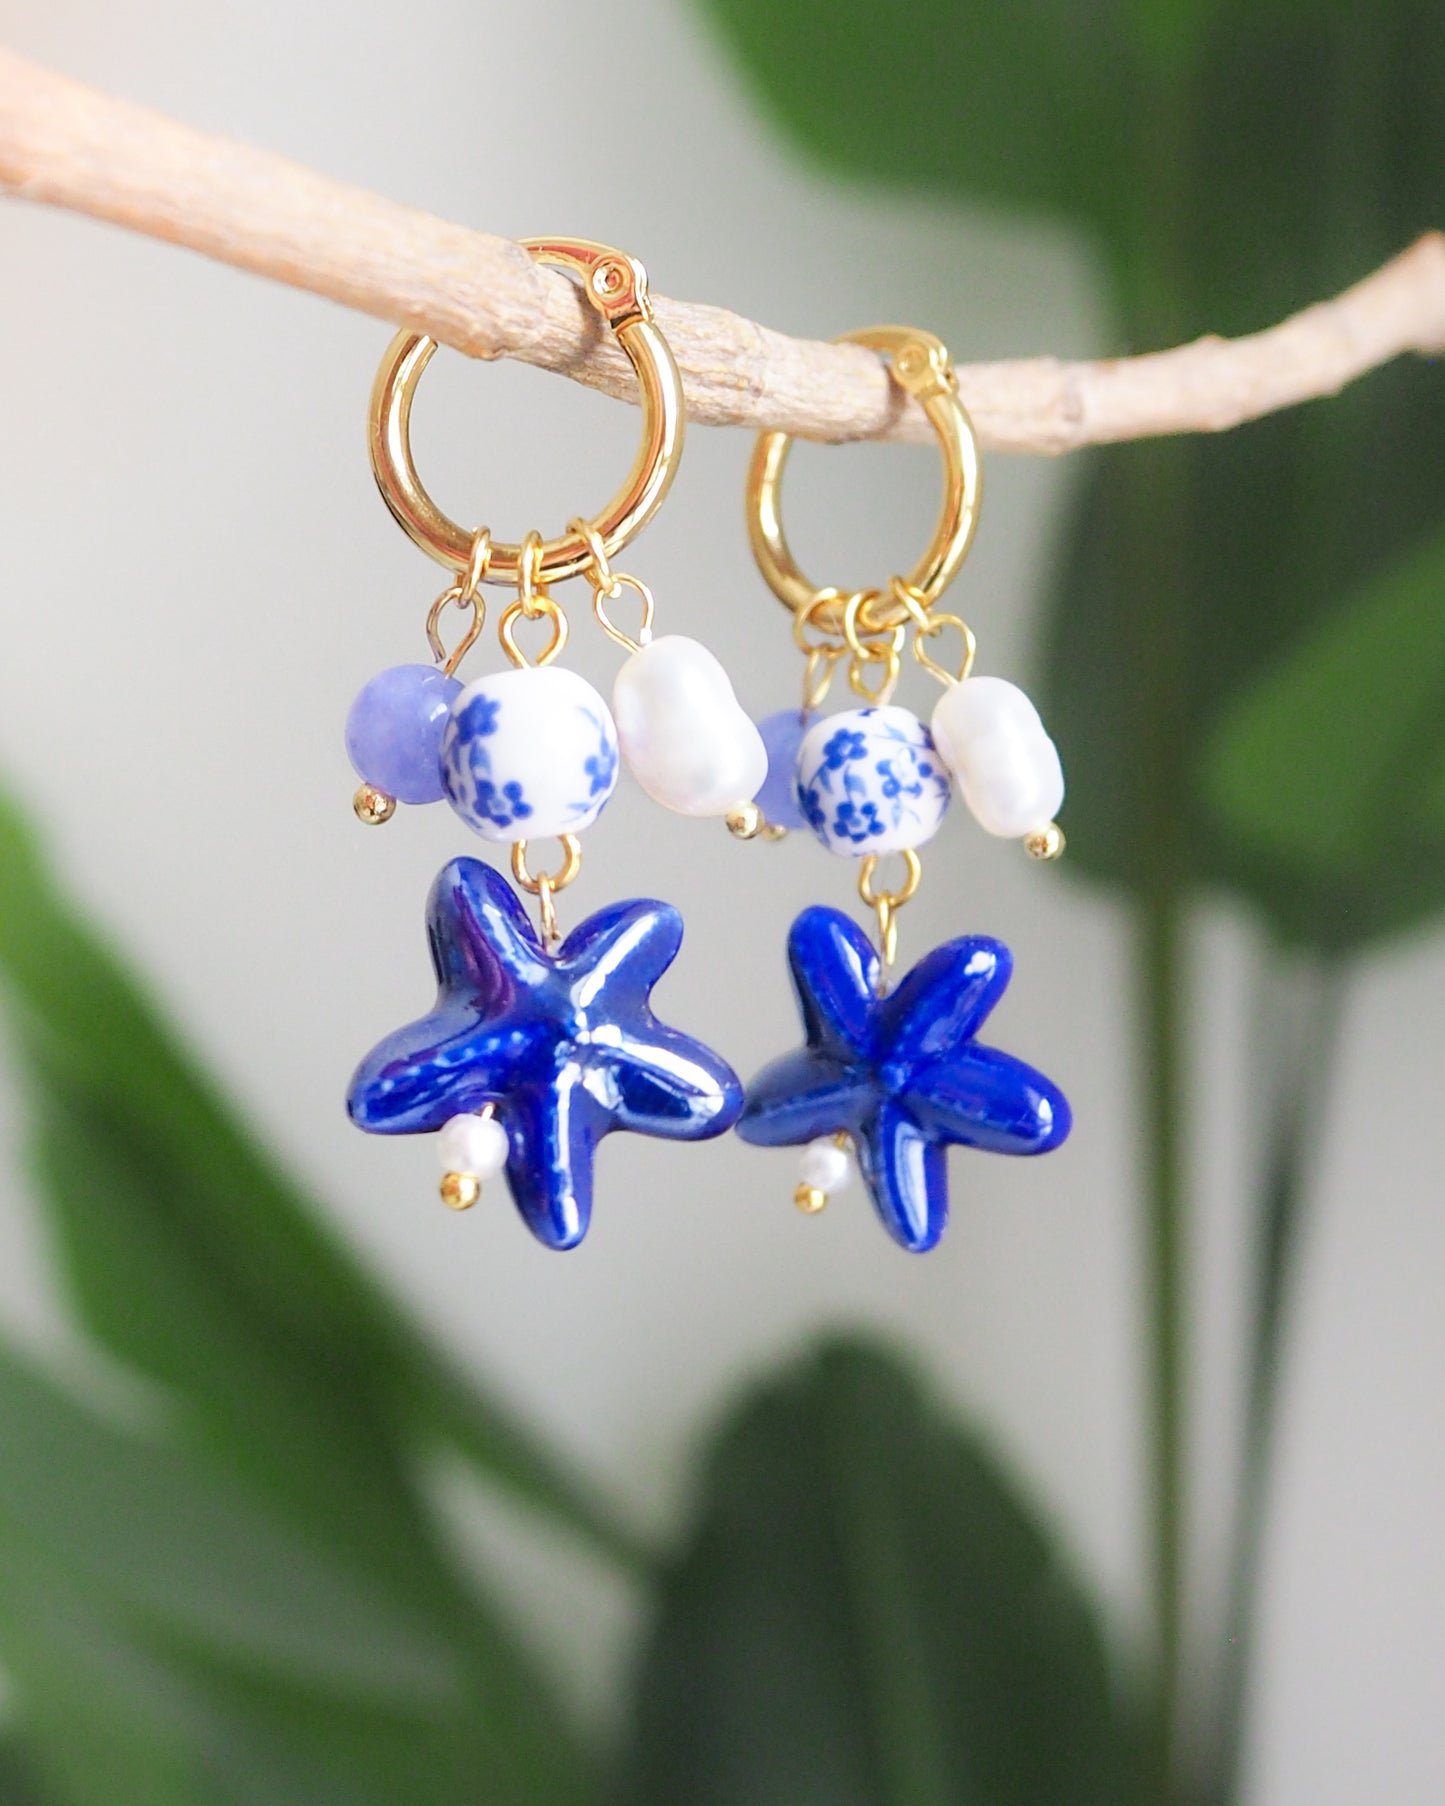 Close up Portuguese Blue Sea Star Starfish Gold Earrings with Azulejo Tile Beads, Freshwater Pearls and Gemstones - Handmade Ocean Inspired Jewelry